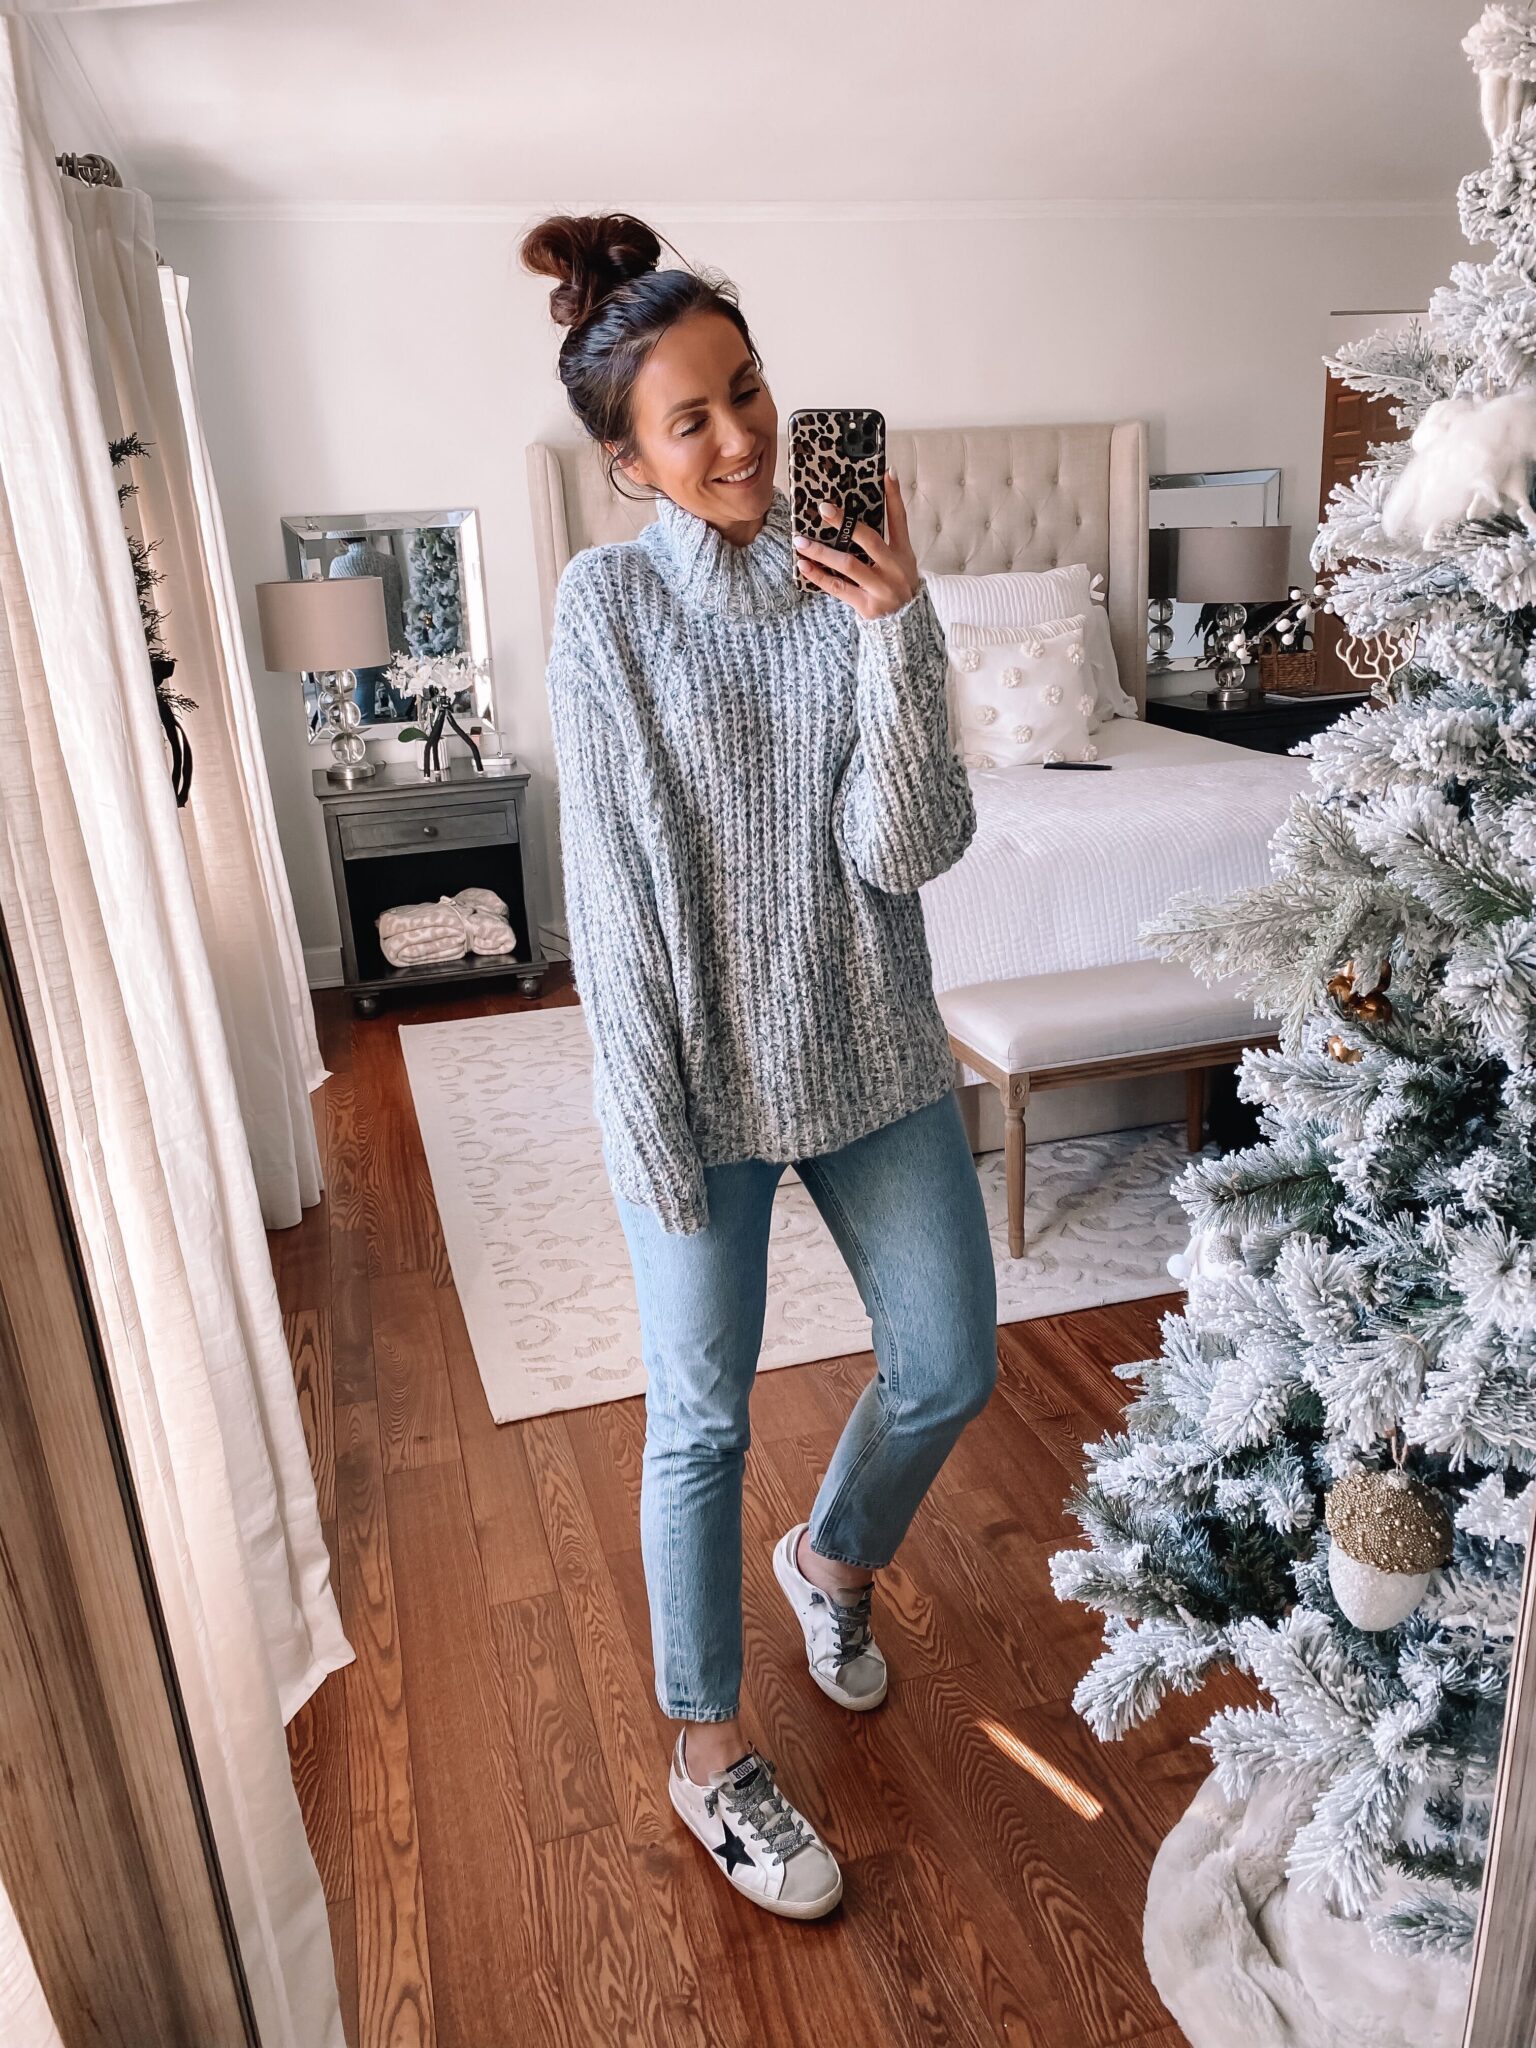 target style, grey sweater with jeans